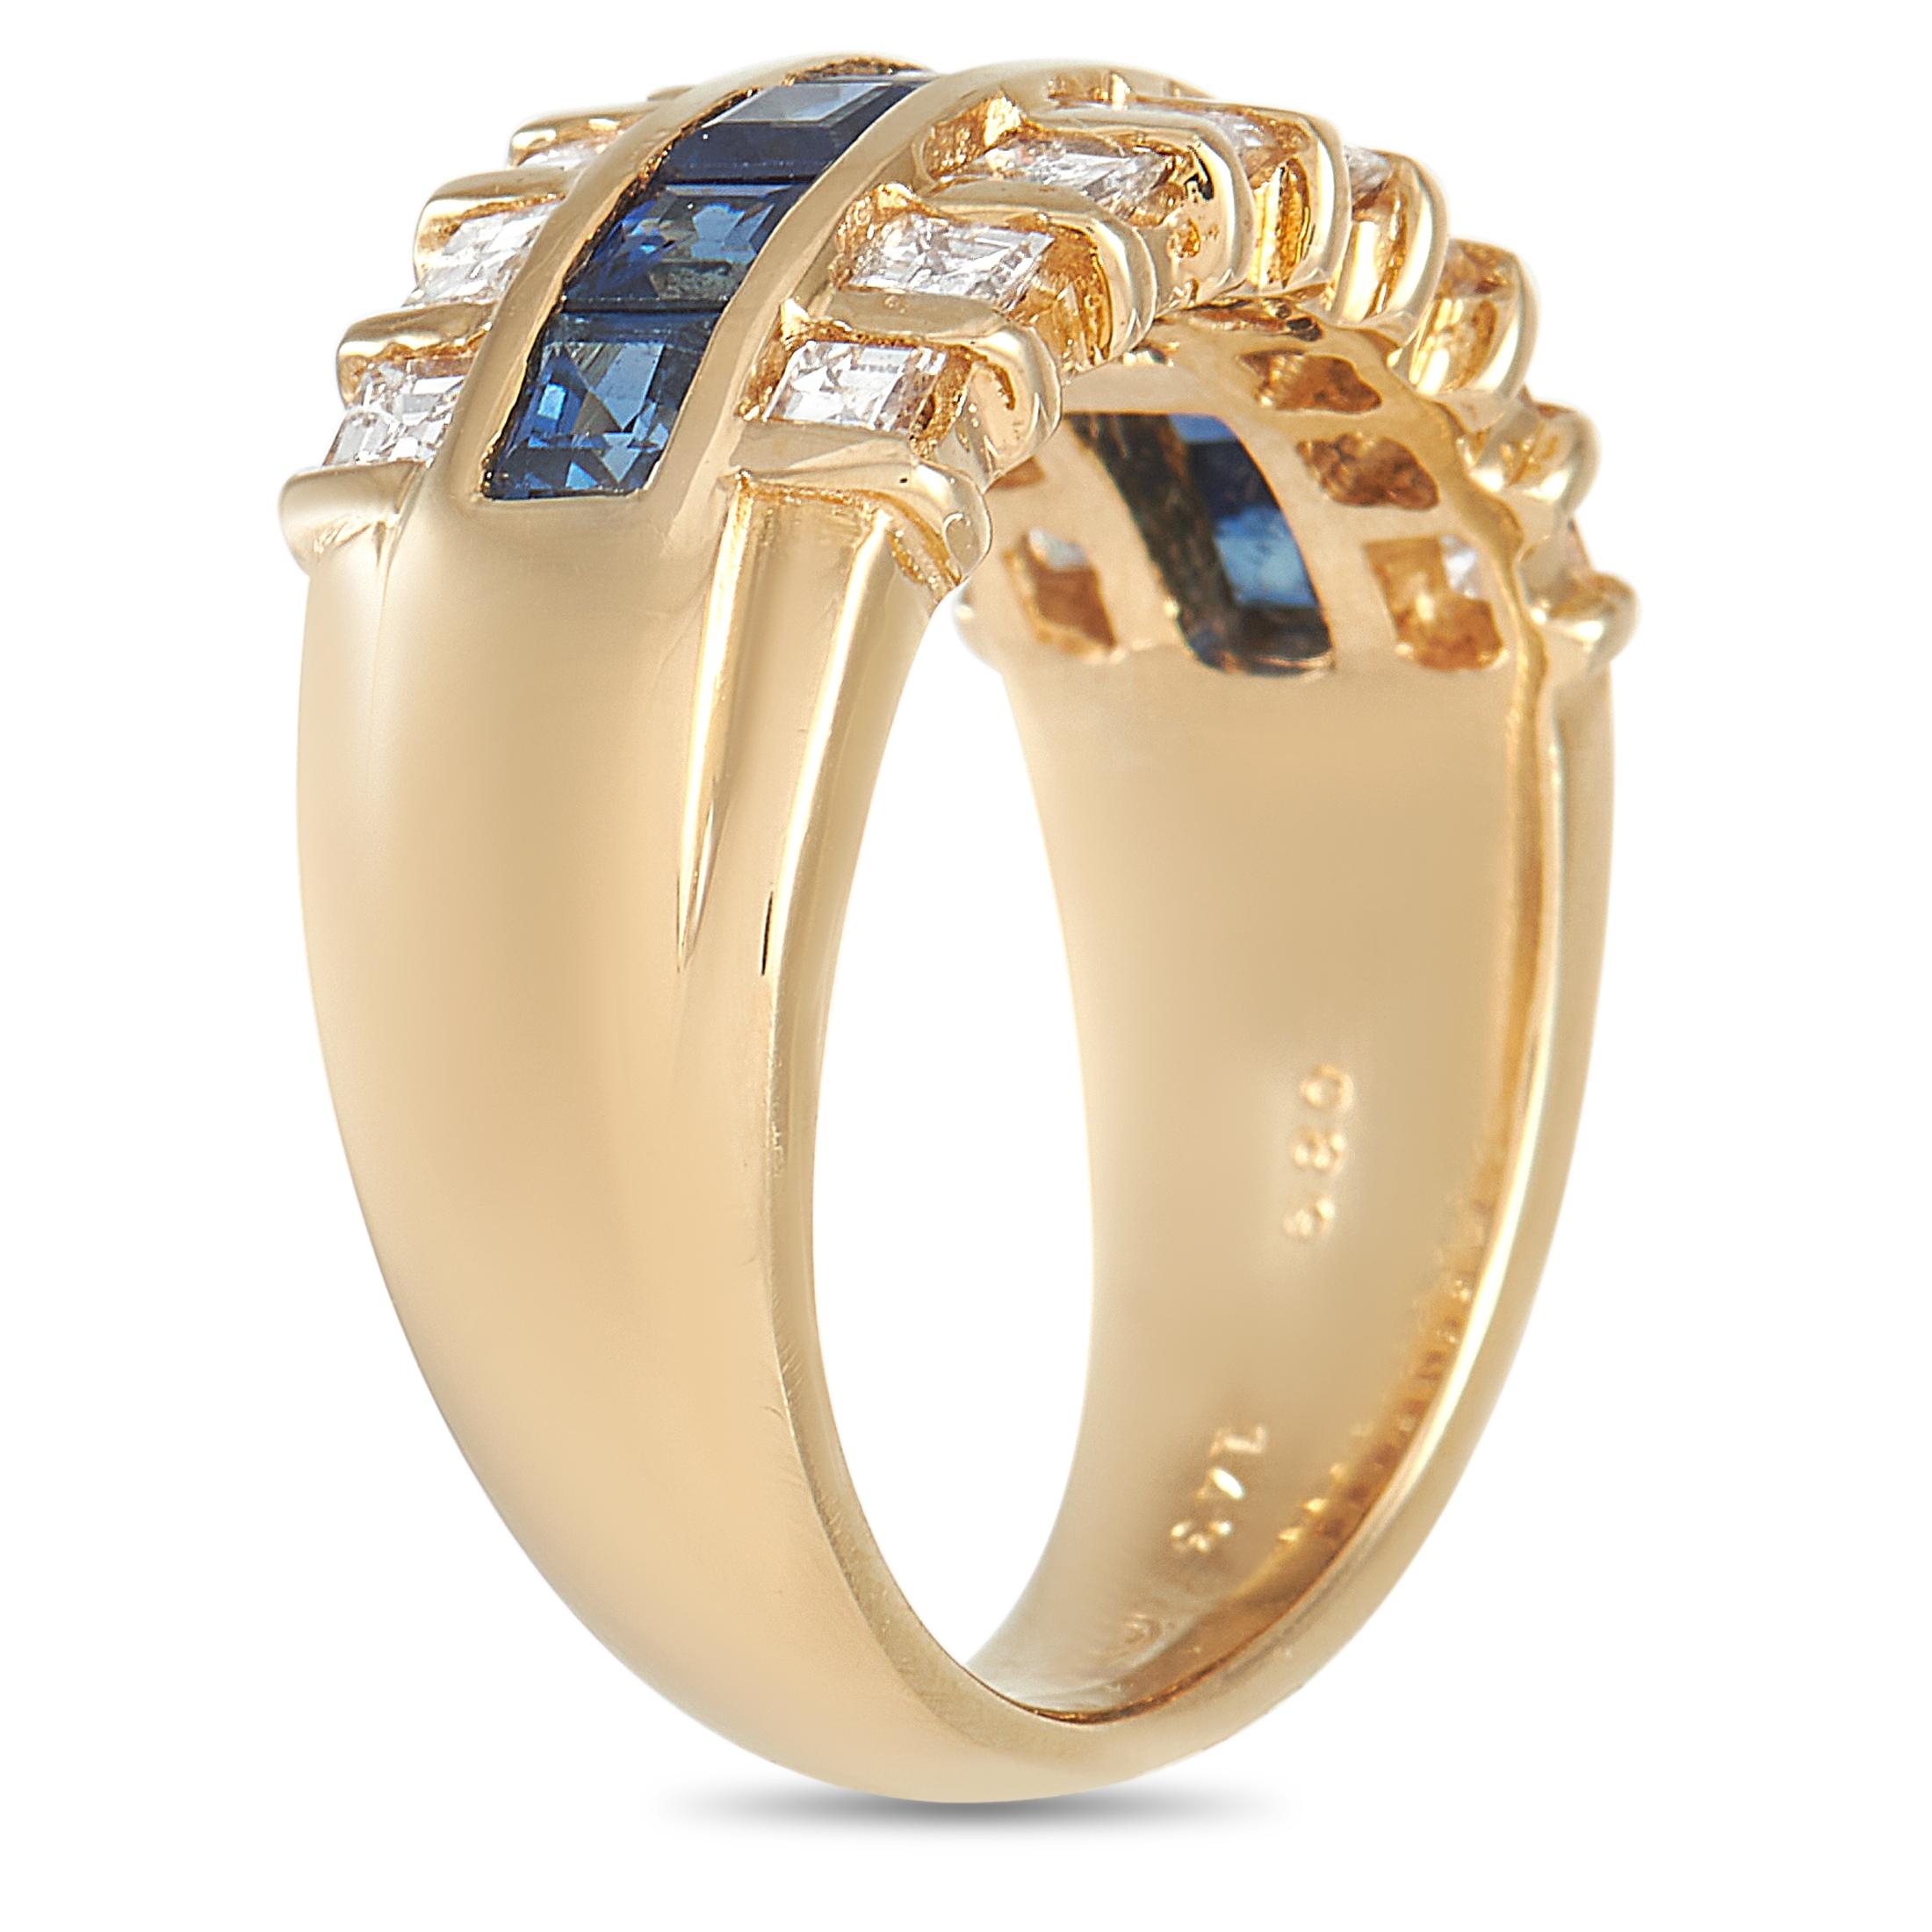 This elegant ring is the type of piece that effortlessly commands attention. At the center, you’ll find band of deep blue square-cut sapphire gemstones totaling 1.43 carats. It’s flanked by an array of shimmering diamonds with a total carat weight